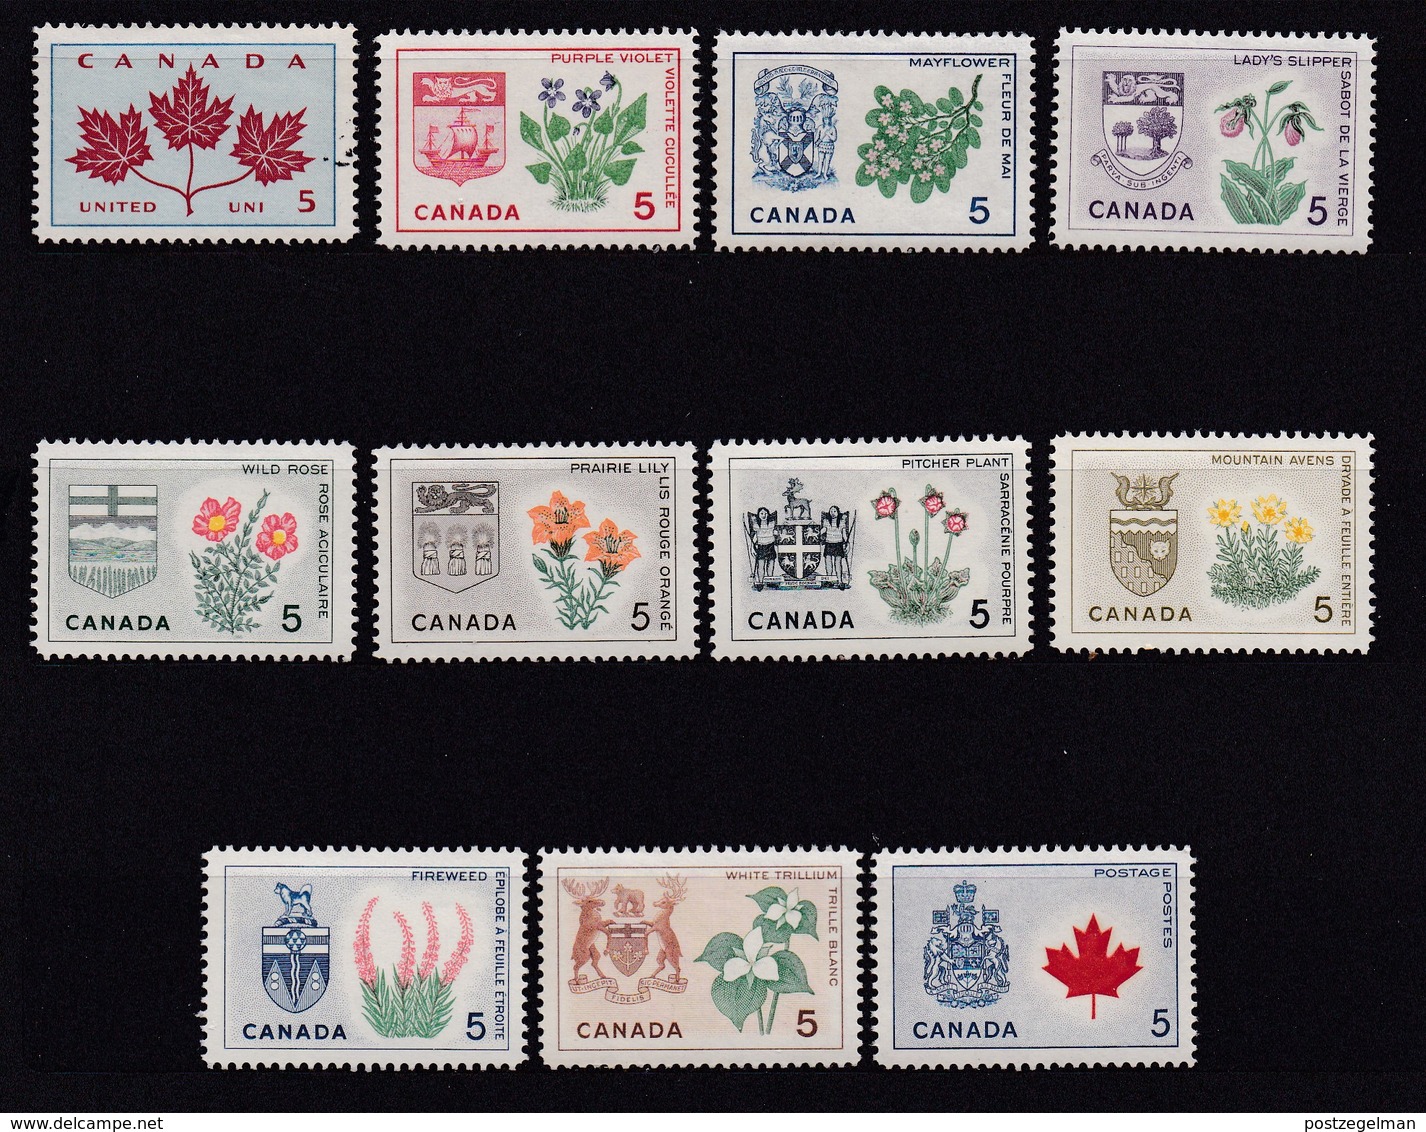 CANADA, 1964, Mint Never Hinged Stamp(s), Provincial Badges,  Michel 362-374, M5523, 11 Values Only - Unused Stamps